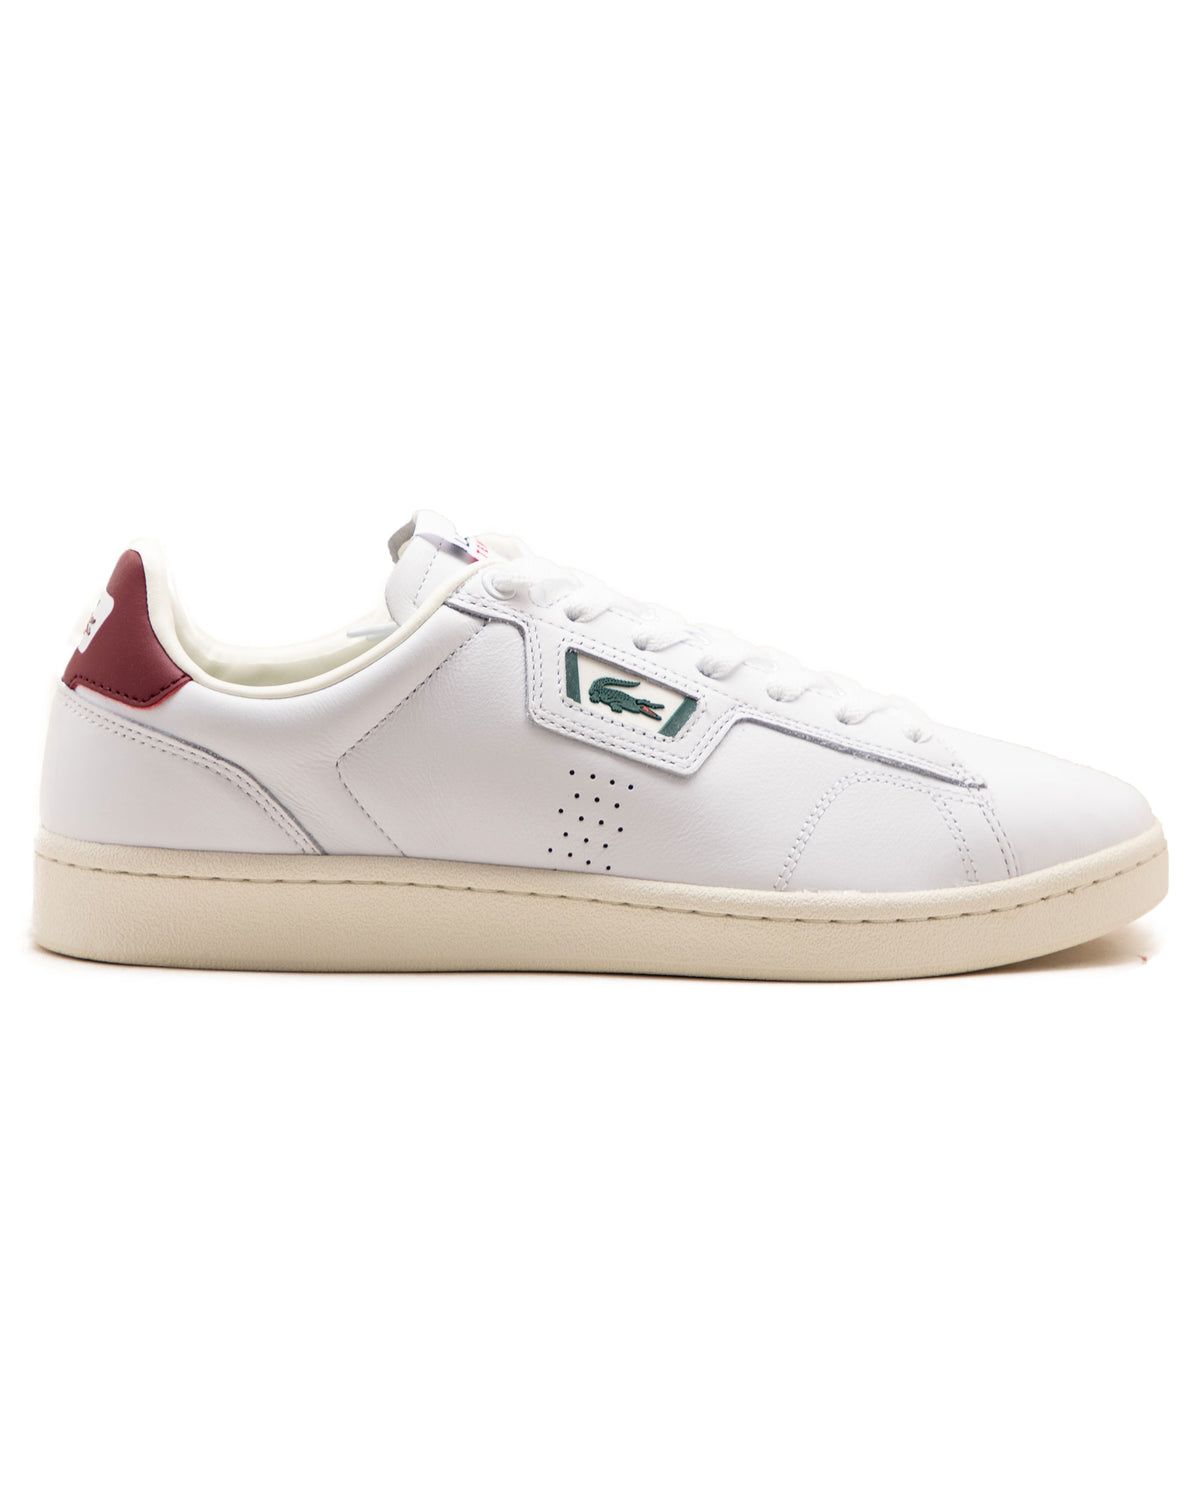 Sneakers Lacoste Master Classic White Bordeaux